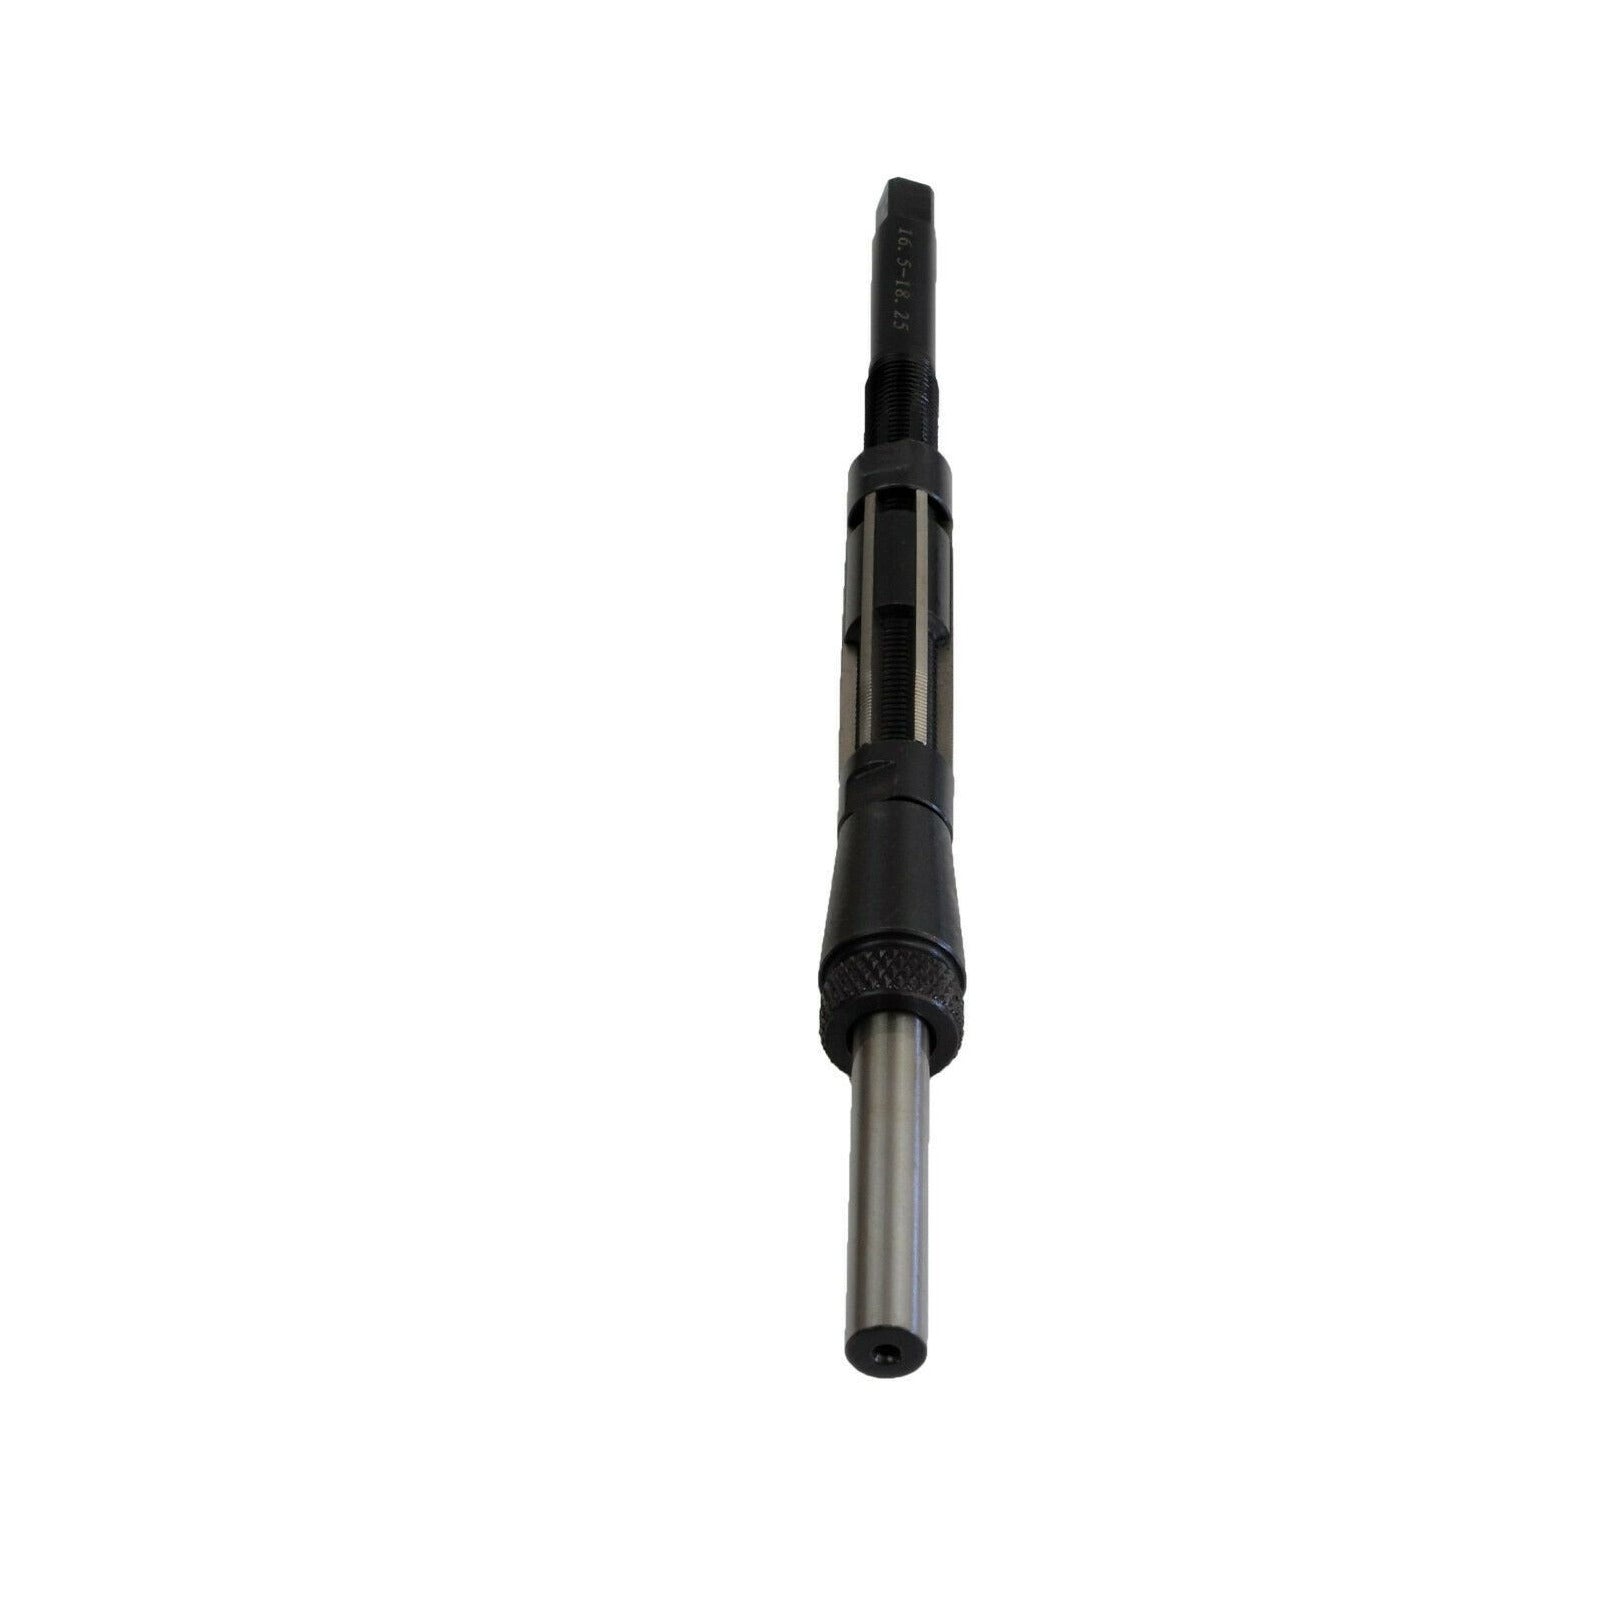 16.5 - 18.25mm Adjustable Hand Reamer with Guide